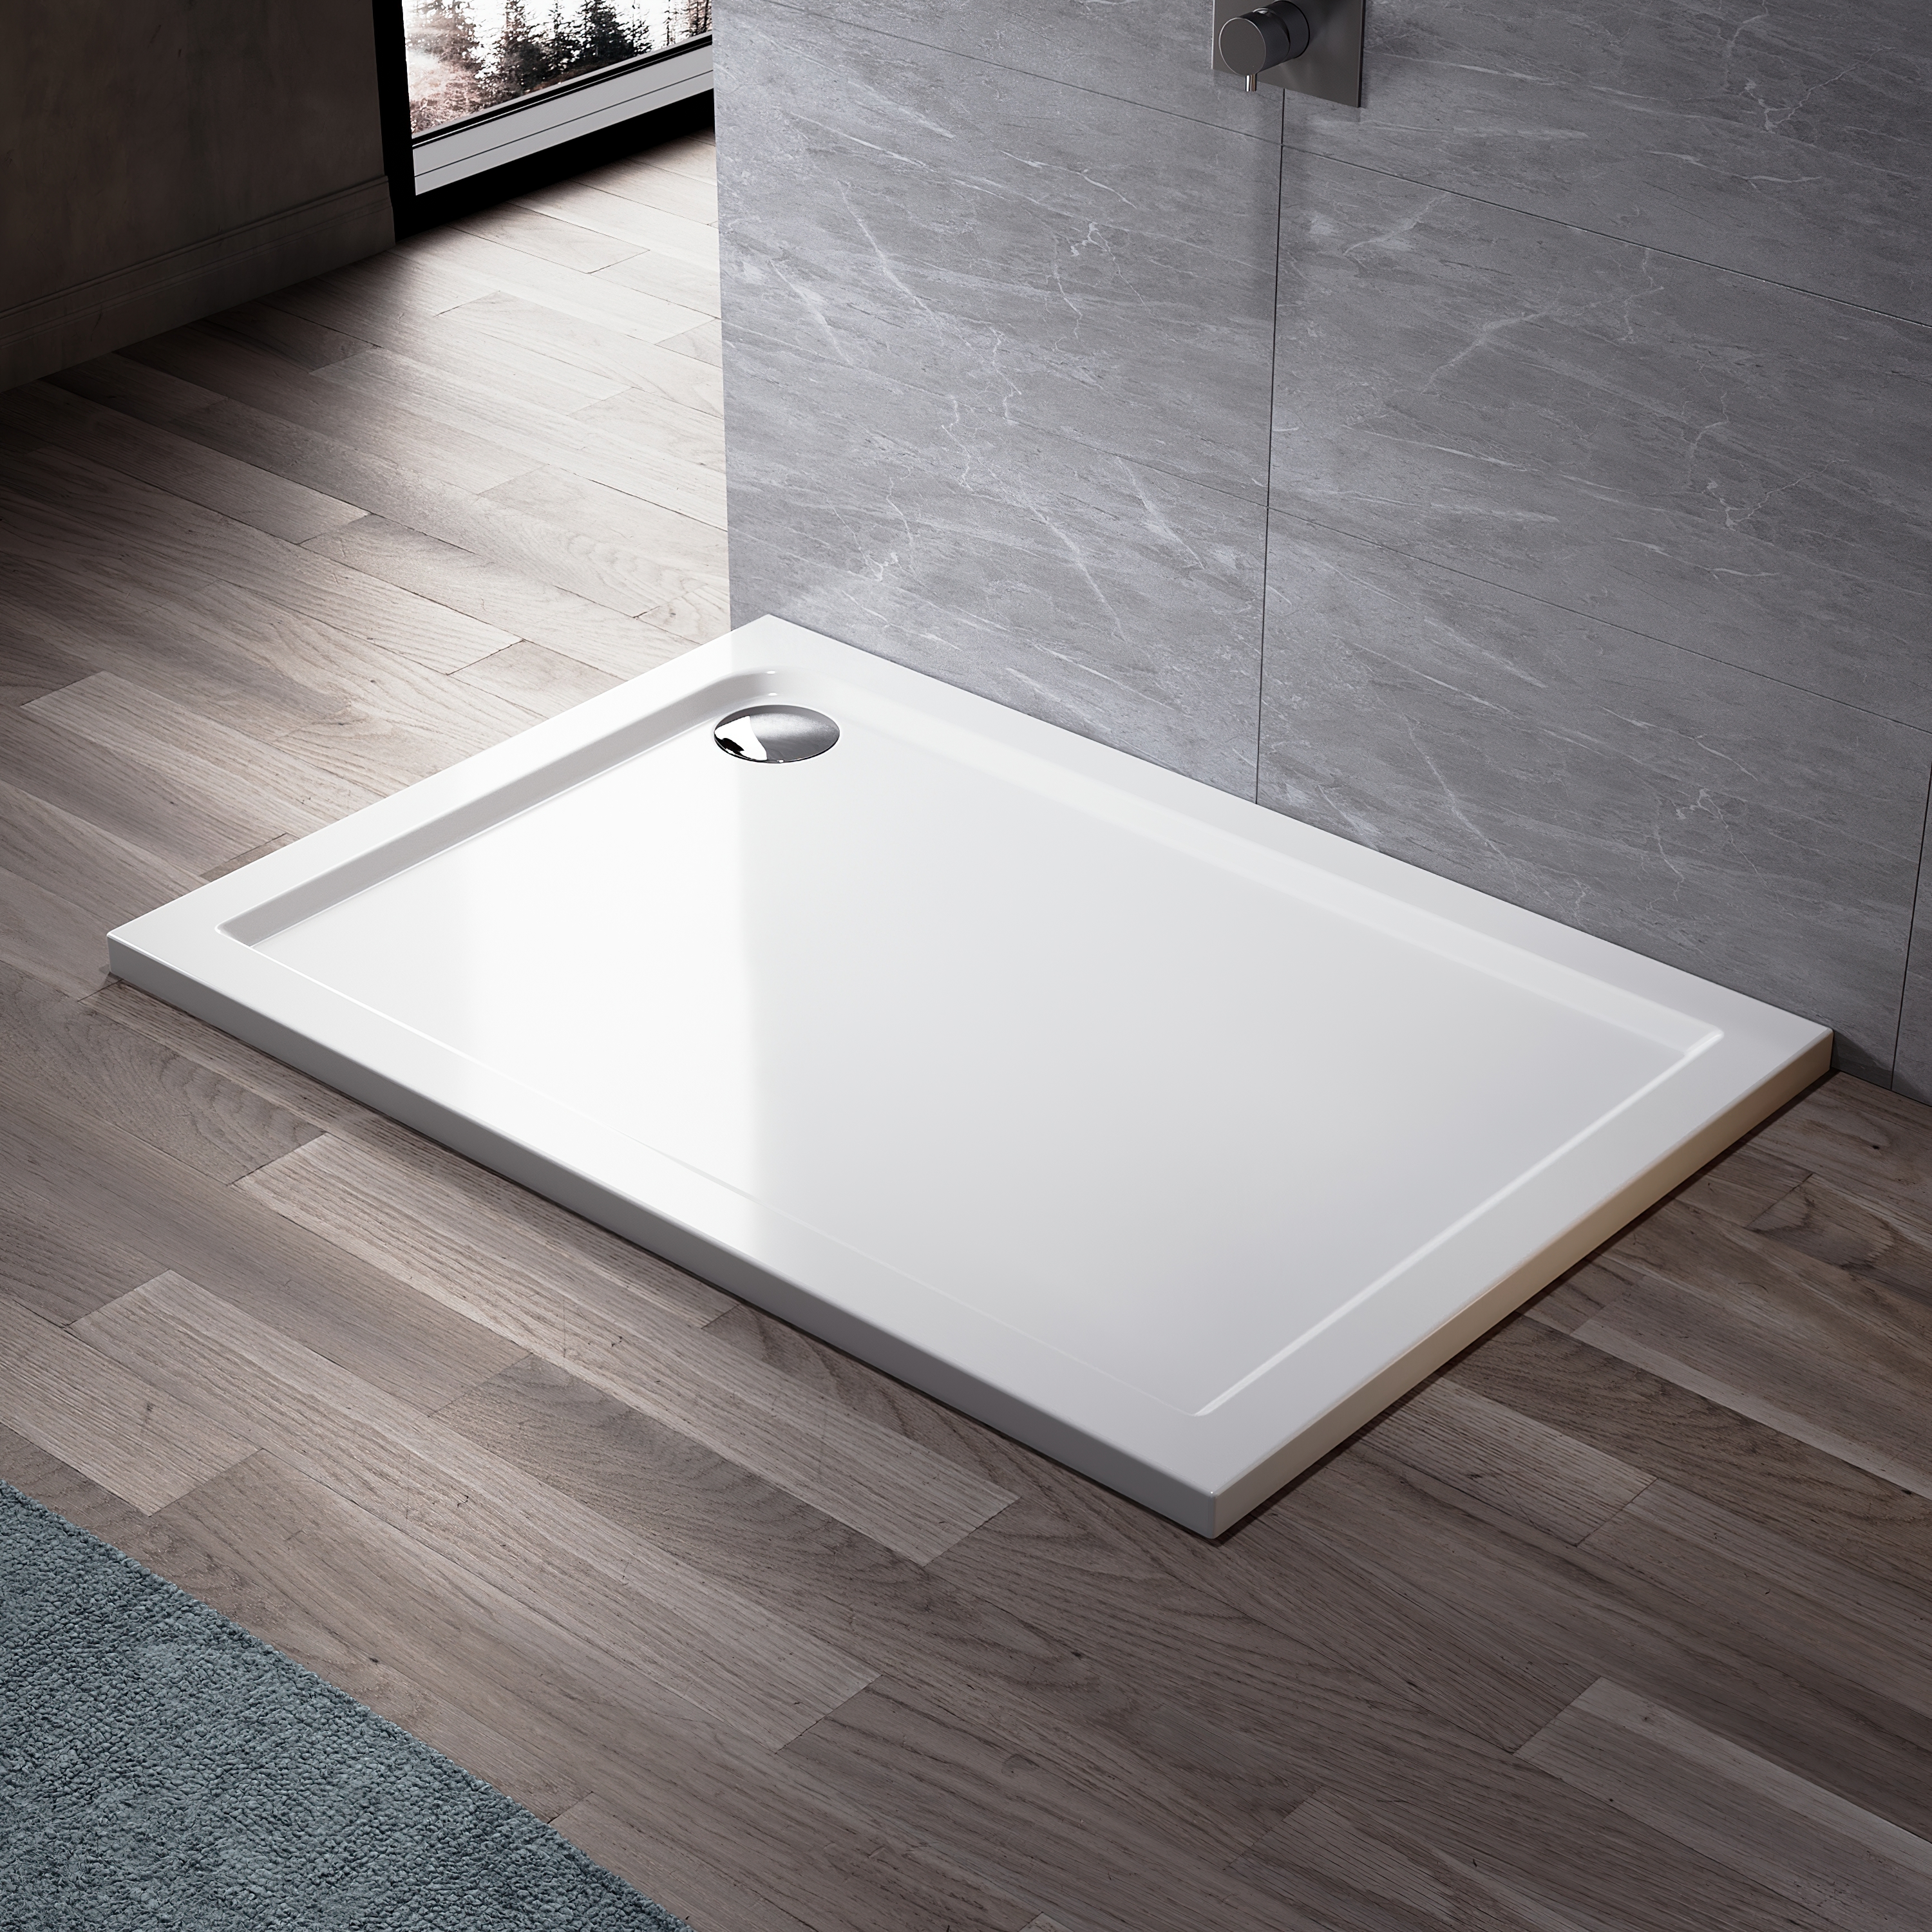 Square Shower Tray Features: